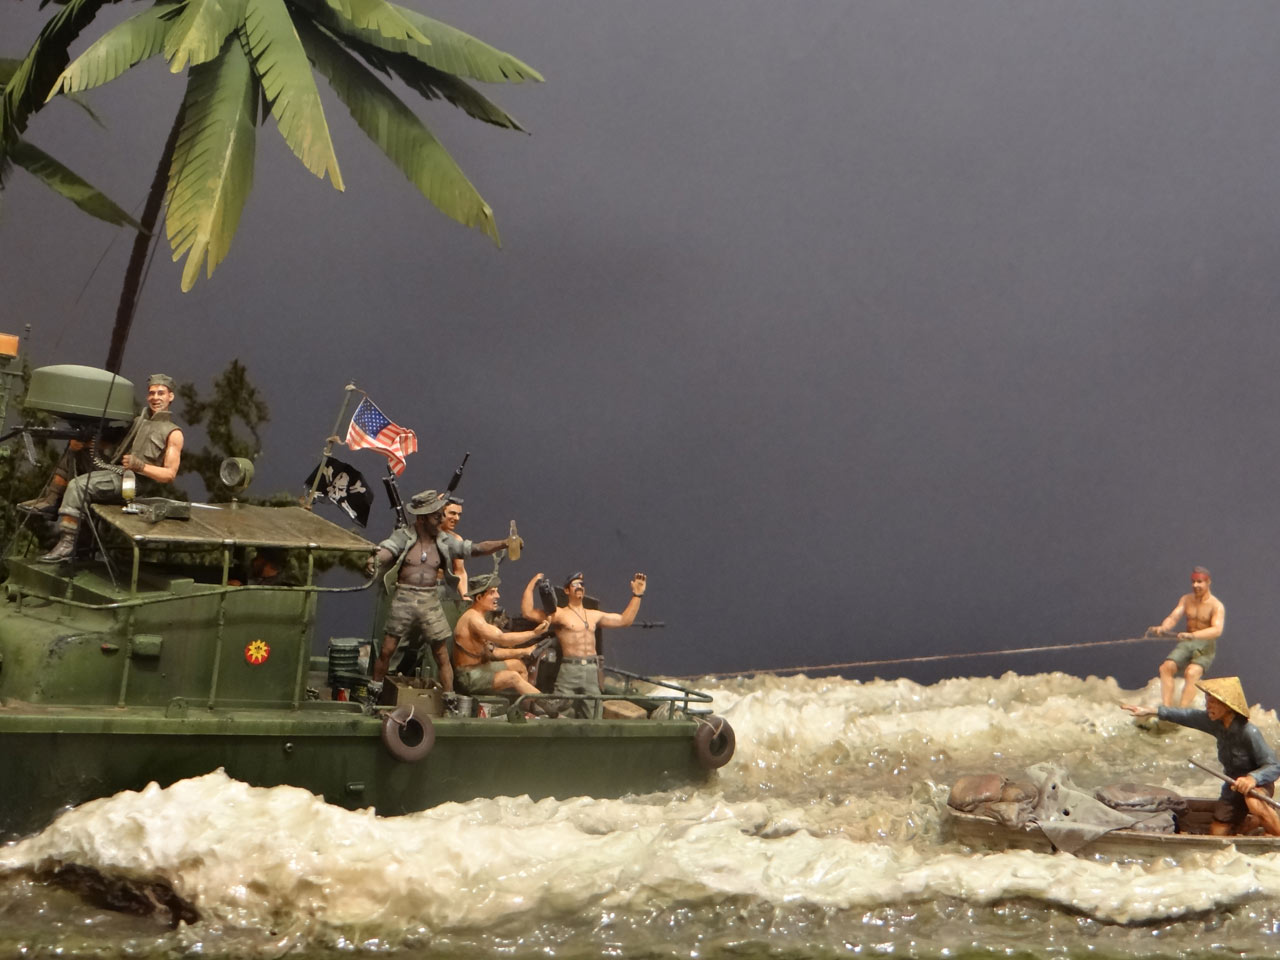 Dioramas and Vignettes: Catch the wave!, photo #5